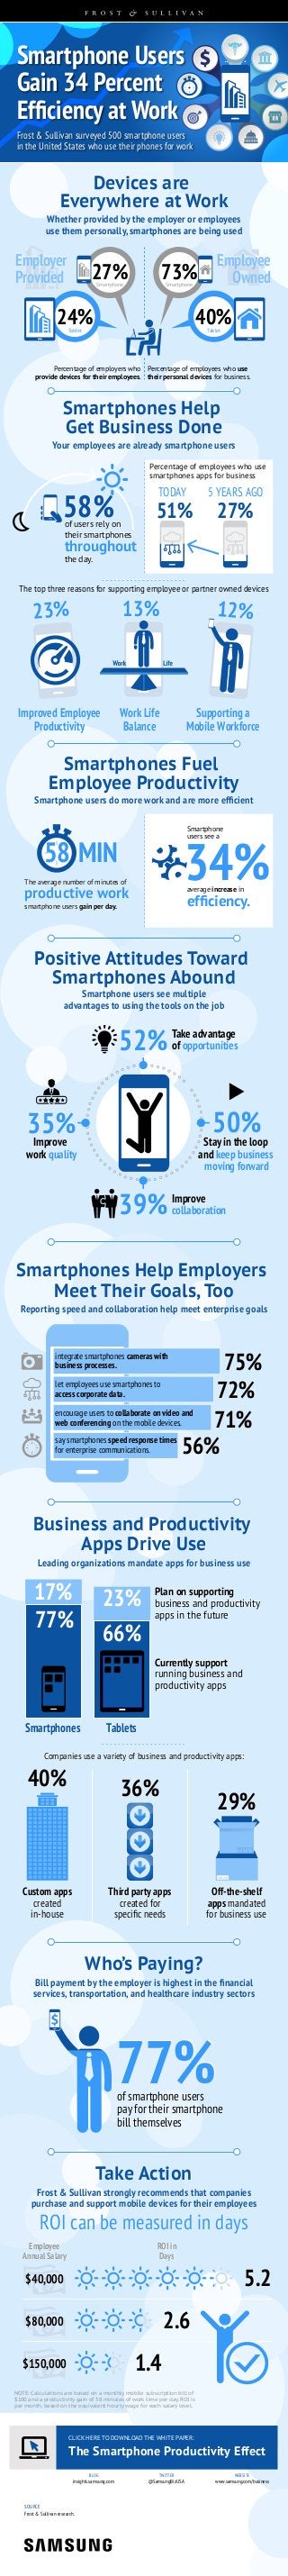 Smartphone Users
Frost & Sullivan surveyed 500 smartphone users
in the United States who use their phones for work
Frost & Sullivan research.
BLOG
insights.samsung.com
TWITTER
@SamsungBizUSA
WEBSITE
www.samsung.com/business
SOURCE
CLICK HERE TO DOWNLOAD THE WHITE PAPER:
The Smartphone Productivity Effect
Devices are
Everywhere at Work
Devices are
Everywhere at Work
Smartphones Help
Get Business Done
Smartphones Help
Get Business Done
Employer
Provided
Employer
Provided
Improved Employee
Productivity
Improved Employee
Productivity
Work Life
Balance
Work Life
Balance
Supporting a
Mobile Workforce
Supporting a
Mobile Workforce
Employee
Owned
Employee
Owned
Whether provided by the employer or employees
use them personally, smartphones are being used
Your employees are already smartphone usersYour employees are already smartphone users
Gain 34 Percent
Efﬁciency at Work
Percentage of employees who use
their personal devices for business.
Percentage of employers who
provide devices for their employees.
The top three reasons for supporting employee or partner owned devices
average increase in
efﬁciency.
of users rely on
their smartphones
throughout
the day.
of users rely on
their smartphones
throughout
the day.
Percentage of employees who use
smartphones apps for business
Percentage of employees who use
smartphones apps for business
Smartphones Fuel
Employee Productivity
Smartphones Fuel
Employee Productivity
Smartphone users do more work and are more efﬁcientSmartphone users do more work and are more efﬁcient
Positive Attitudes Toward
Smartphones Abound
Positive Attitudes Toward
Smartphones Abound
Smartphone users see multiple
advantages to using the tools on the job
Smartphone users see multiple
advantages to using the tools on the job
Smartphones Help Employers
Meet Their Goals, Too
Smartphones Help Employers
Meet Their Goals, Too
Reporting speed and collaboration help meet enterprise goalsReporting speed and collaboration help meet enterprise goals
Business and Productivity
Apps Drive Use
Business and Productivity
Apps Drive Use
Leading organizations mandate apps for business useLeading organizations mandate apps for business use
Companies use a variety of business and productivity apps:Companies use a variety of business and productivity apps:
Who’s Paying?Who’s Paying?
24%
27%
40%
73%
58%58% 51%51% 27%27%
23%23% 13%13%
34%34%
12%12%
TODAYTODAY 5 YEARS AGO5 YEARS AGO
SmartphoneSmartphone SmartphoneSmartphone
TabletTabletTabletTablet
58585858 MINMIN
productive work
smartphone users gain per day.
The average number of minutes of
productive work
smartphone users gain per day.
The average number of minutes of
Smartphone
users see a
52%52%
Improve
collaboration
Improve
collaboration
Improve
work quality
Improve
work quality
50%50%
39%39%
75%75%
72%72%
71%71%
56%56%
35%35% Stay in the loop
and keep business
moving forward
Stay in the loop
and keep business
moving forward
Take advantage
of opportunities
Take advantage
of opportunities
encourage users to collaborate on video and
web conferencing on the mobile devices.
let employees use smartphones to
access corporate data.
integrate smartphones cameras with
business processes.
say smartphones speed response times
for enterprise communications.
of smartphone users
pay for their smartphone
bill themselves
77%77%of smartphone users
pay for their smartphone
bill themselves
77%77%
Bill payment by the employer is highest in the ﬁnancial
services, transportation, and healthcare industry sectors
Bill payment by the employer is highest in the ﬁnancial
services, transportation, and healthcare industry sectors
Take ActionTake Action
Frost & Sullivan strongly recommends that companies
purchase and support mobile devices for their employees
Frost & Sullivan strongly recommends that companies
purchase and support mobile devices for their employees
NOTE: Calculations are based on a monthly mobile subscription bill of
$100 and a productivity gain of 58 minutes of work time per day. ROI is
per month, based on the equivalent hourly wage for each salary level.
40%40%
Custom apps
created
in-house
Custom apps
created
in-house
29%29%
Off-the-shelf
apps mandated
for business use
Off-the-shelf
apps mandated
for business use
36%36%
Third party apps
created for
speciﬁc needs
Third party apps
created for
speciﬁc needs
ROI can be measured in daysROI can be measured in days
SmartphonesSmartphones
Currently support
running business and
productivity apps
Currently support
running business and
productivity apps
Plan on supporting
business and productivity
apps in the future
Plan on supporting
business and productivity
apps in the future
TabletsTablets
66%
77%
17% 23%
Employee
Annual Salary
Employee
Annual Salary
ROI in
Days
ROI in
Days
5.25.2
2.62.6
1.41.4
$80,000$80,000
$40,000$40,000
$150,000$150,000
 